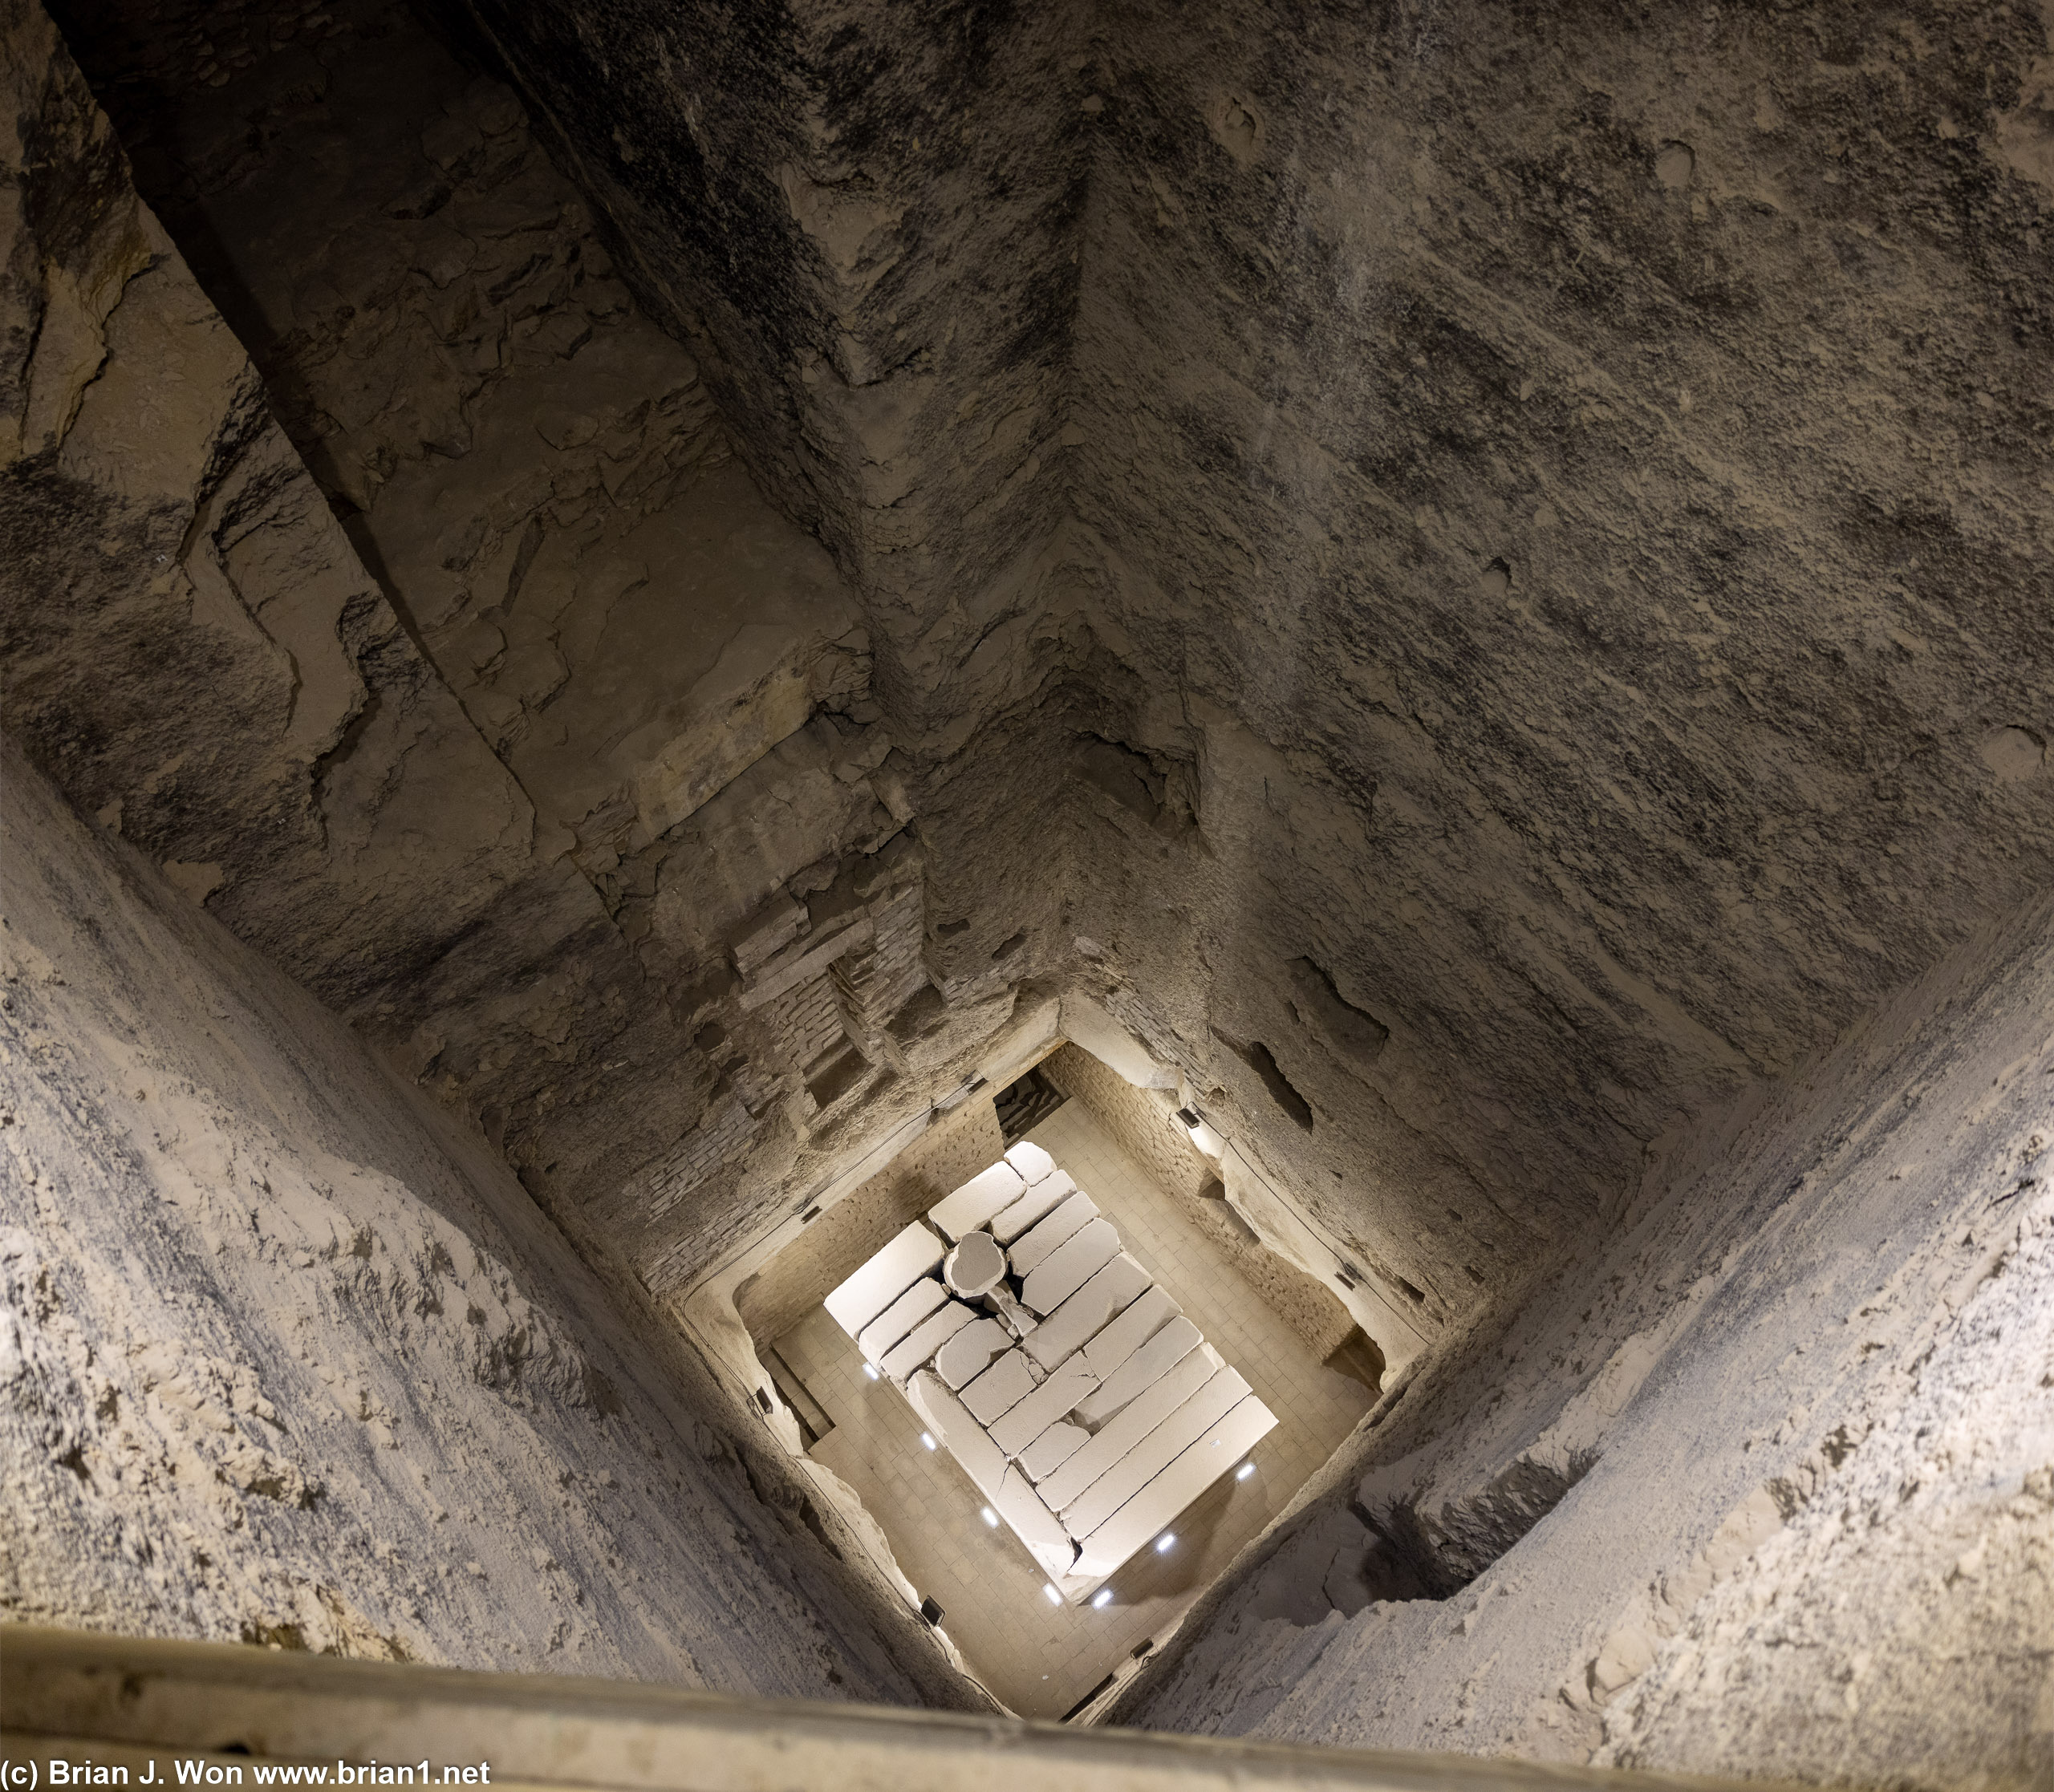 Looking down at the burial chamber.